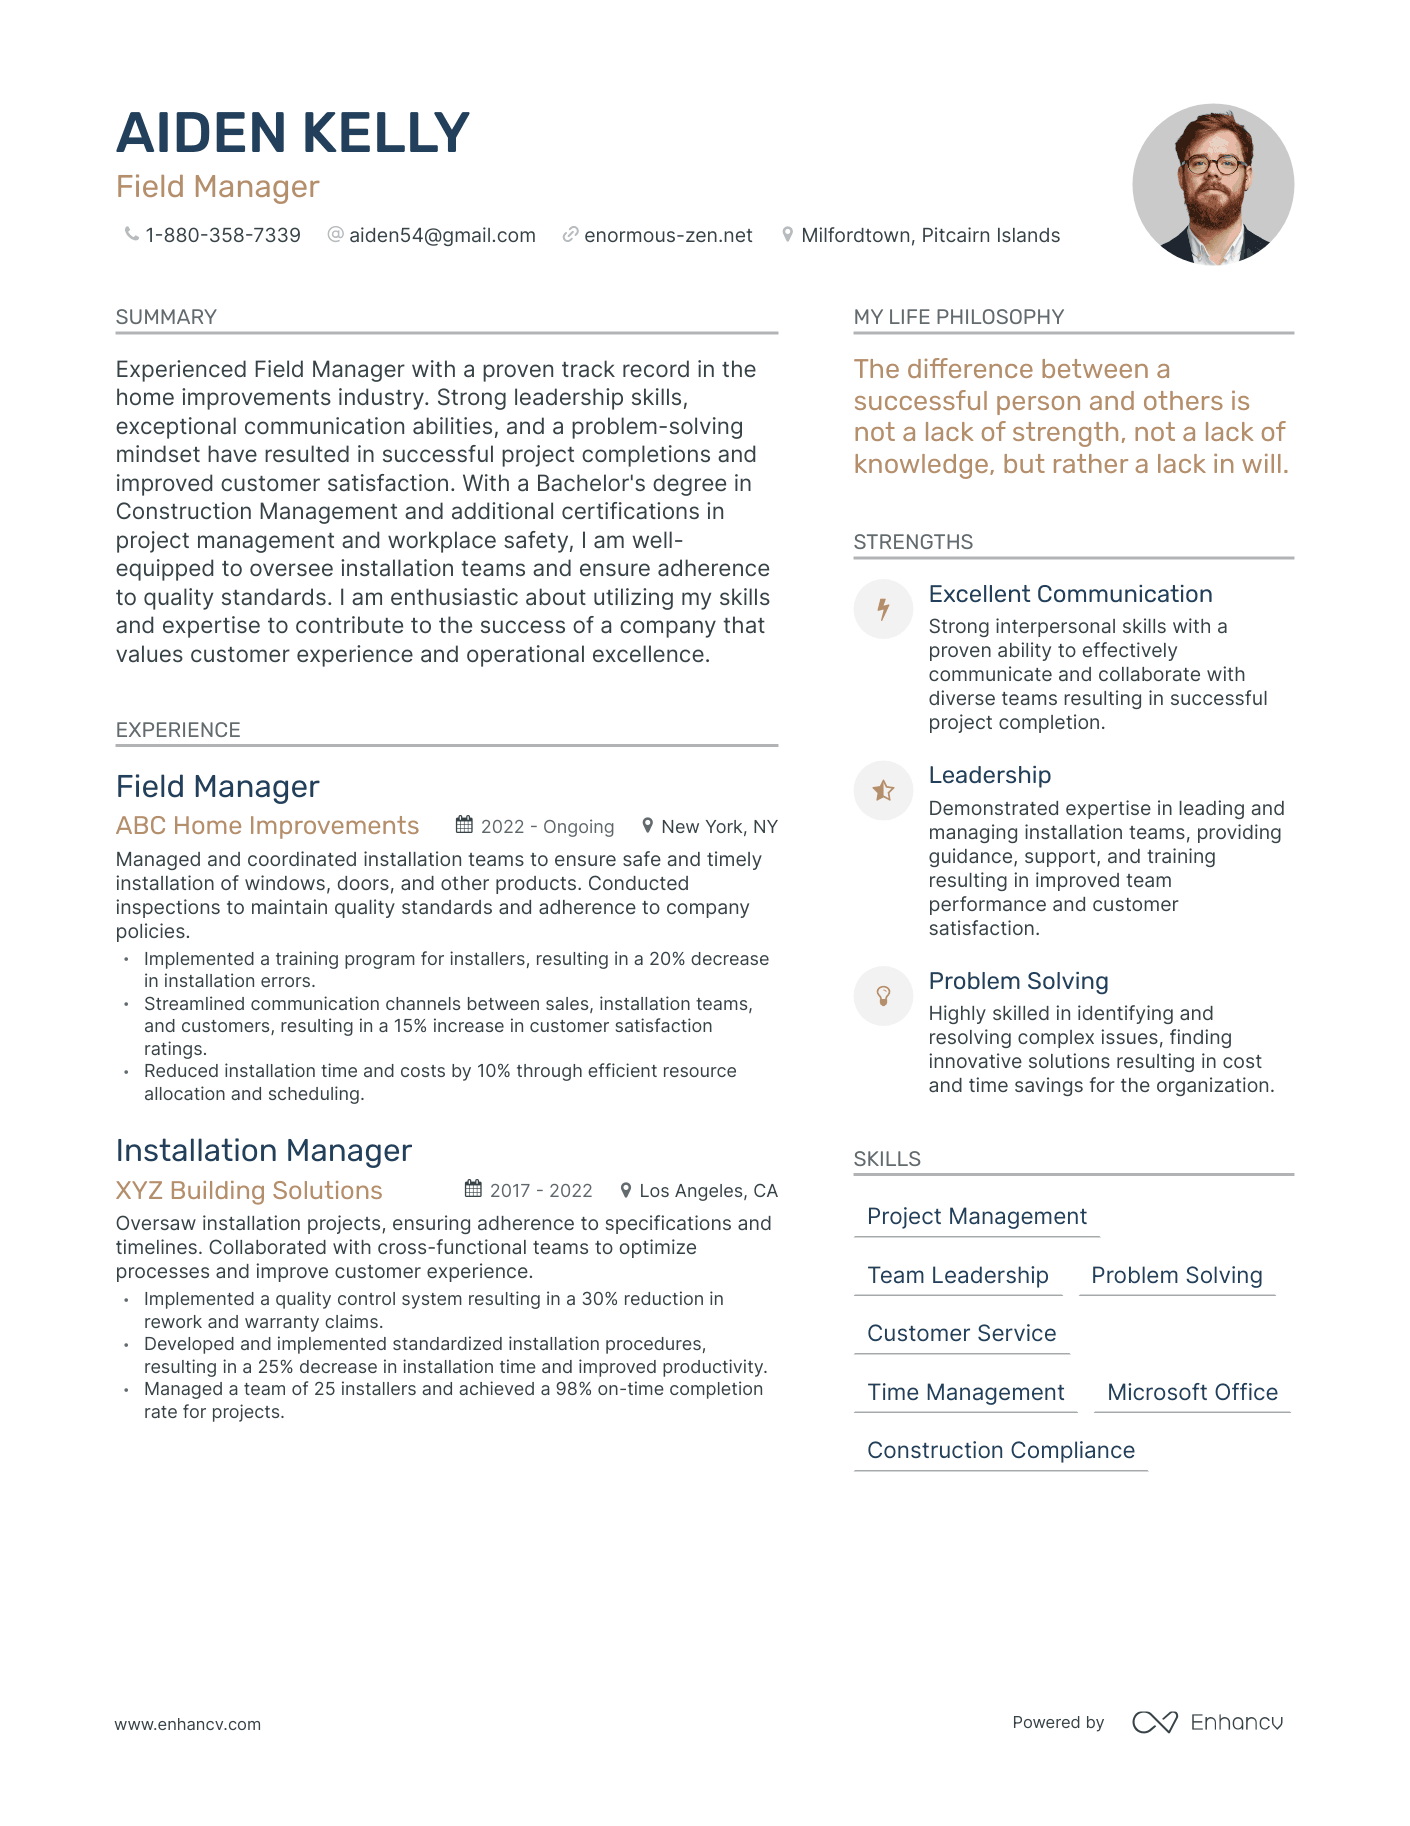 Field Manager resume example